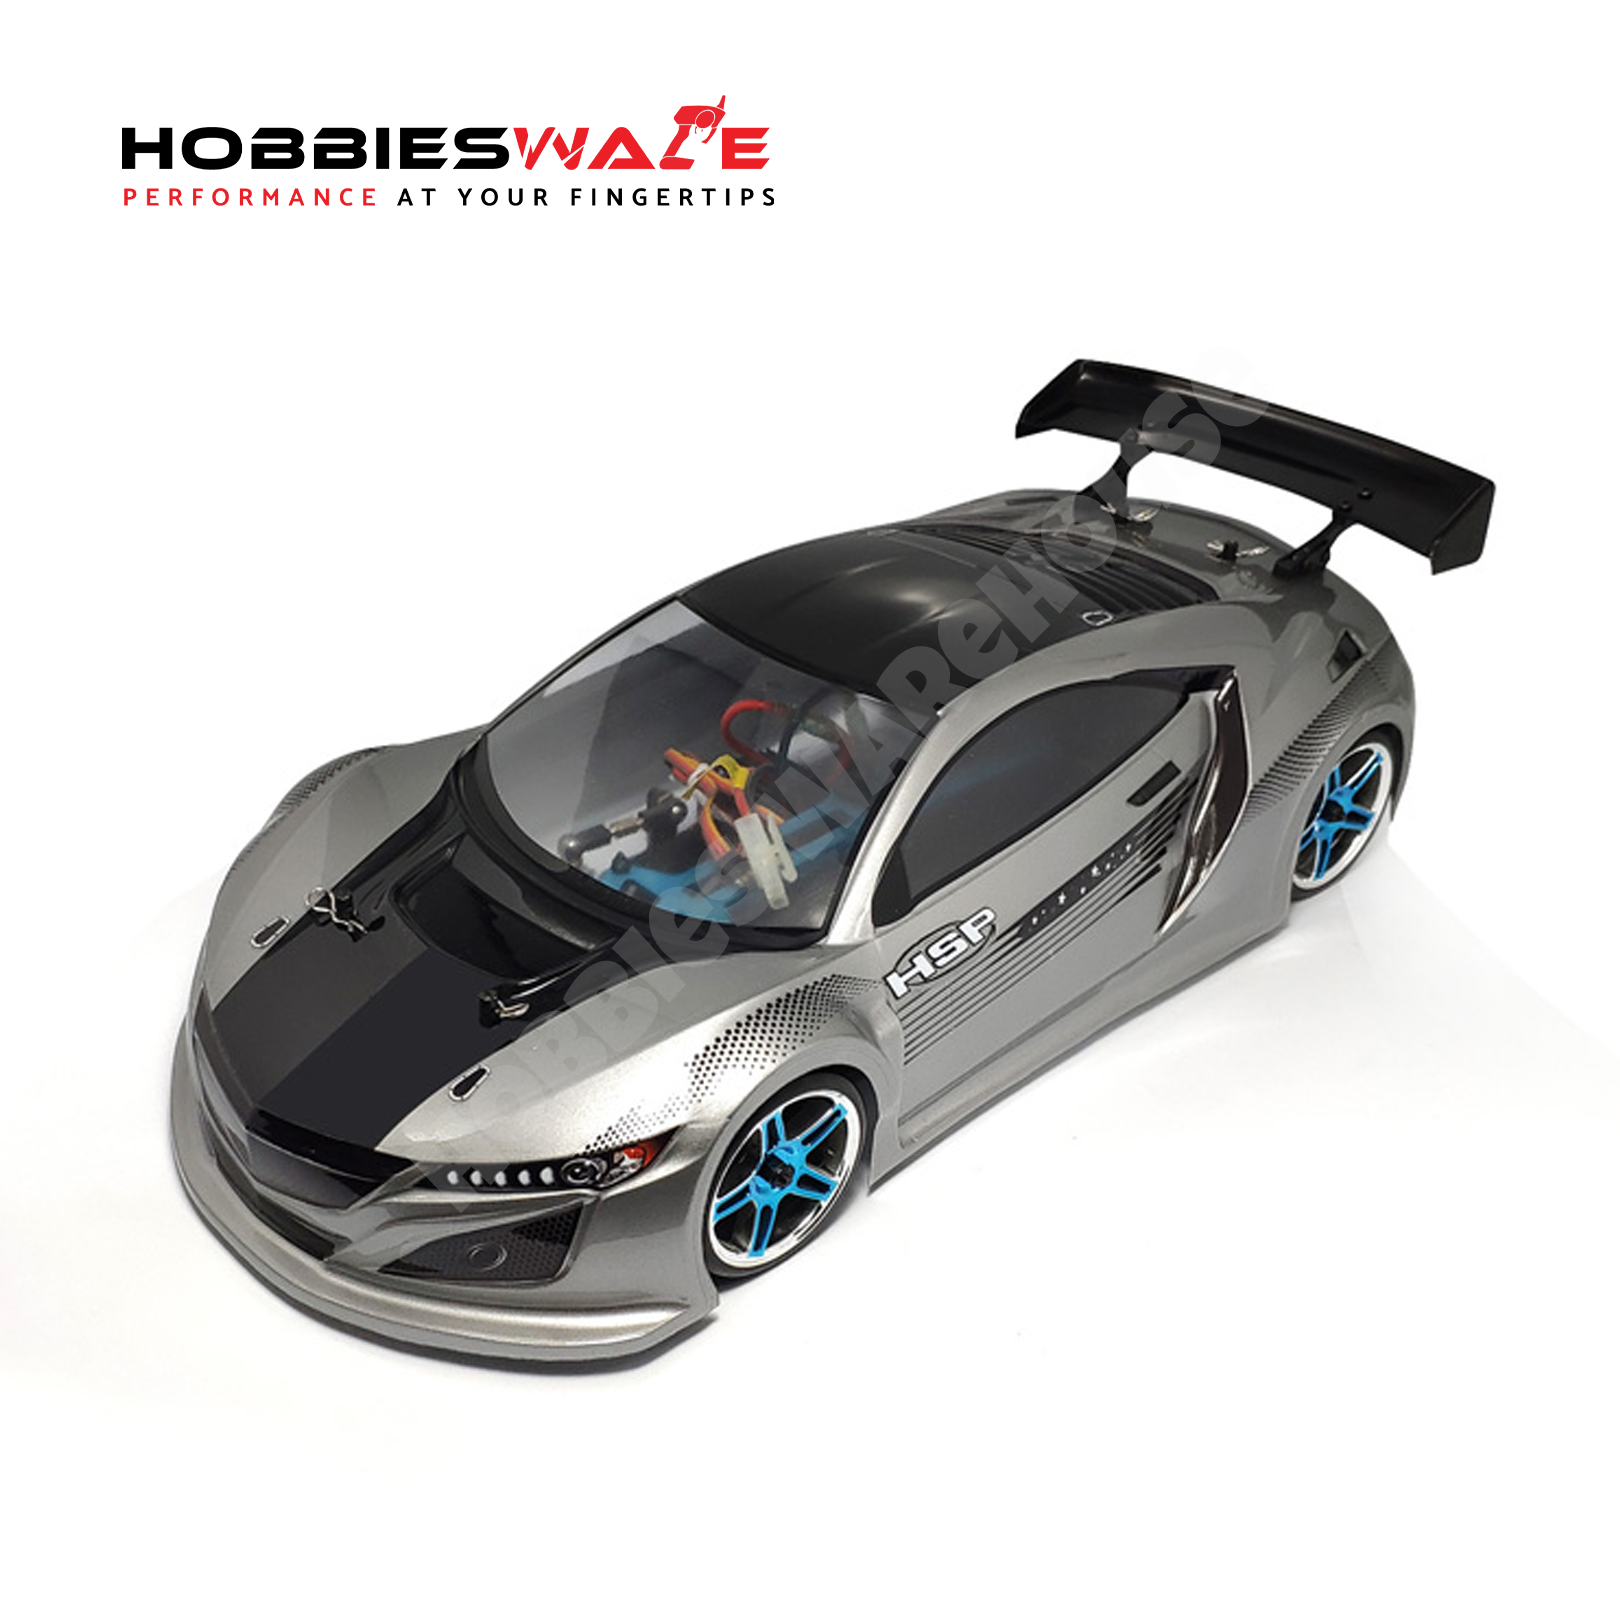 HSP 1/10th Scale Brushed Electric Powered On Road Touring Car with 2.4G Transmitter 